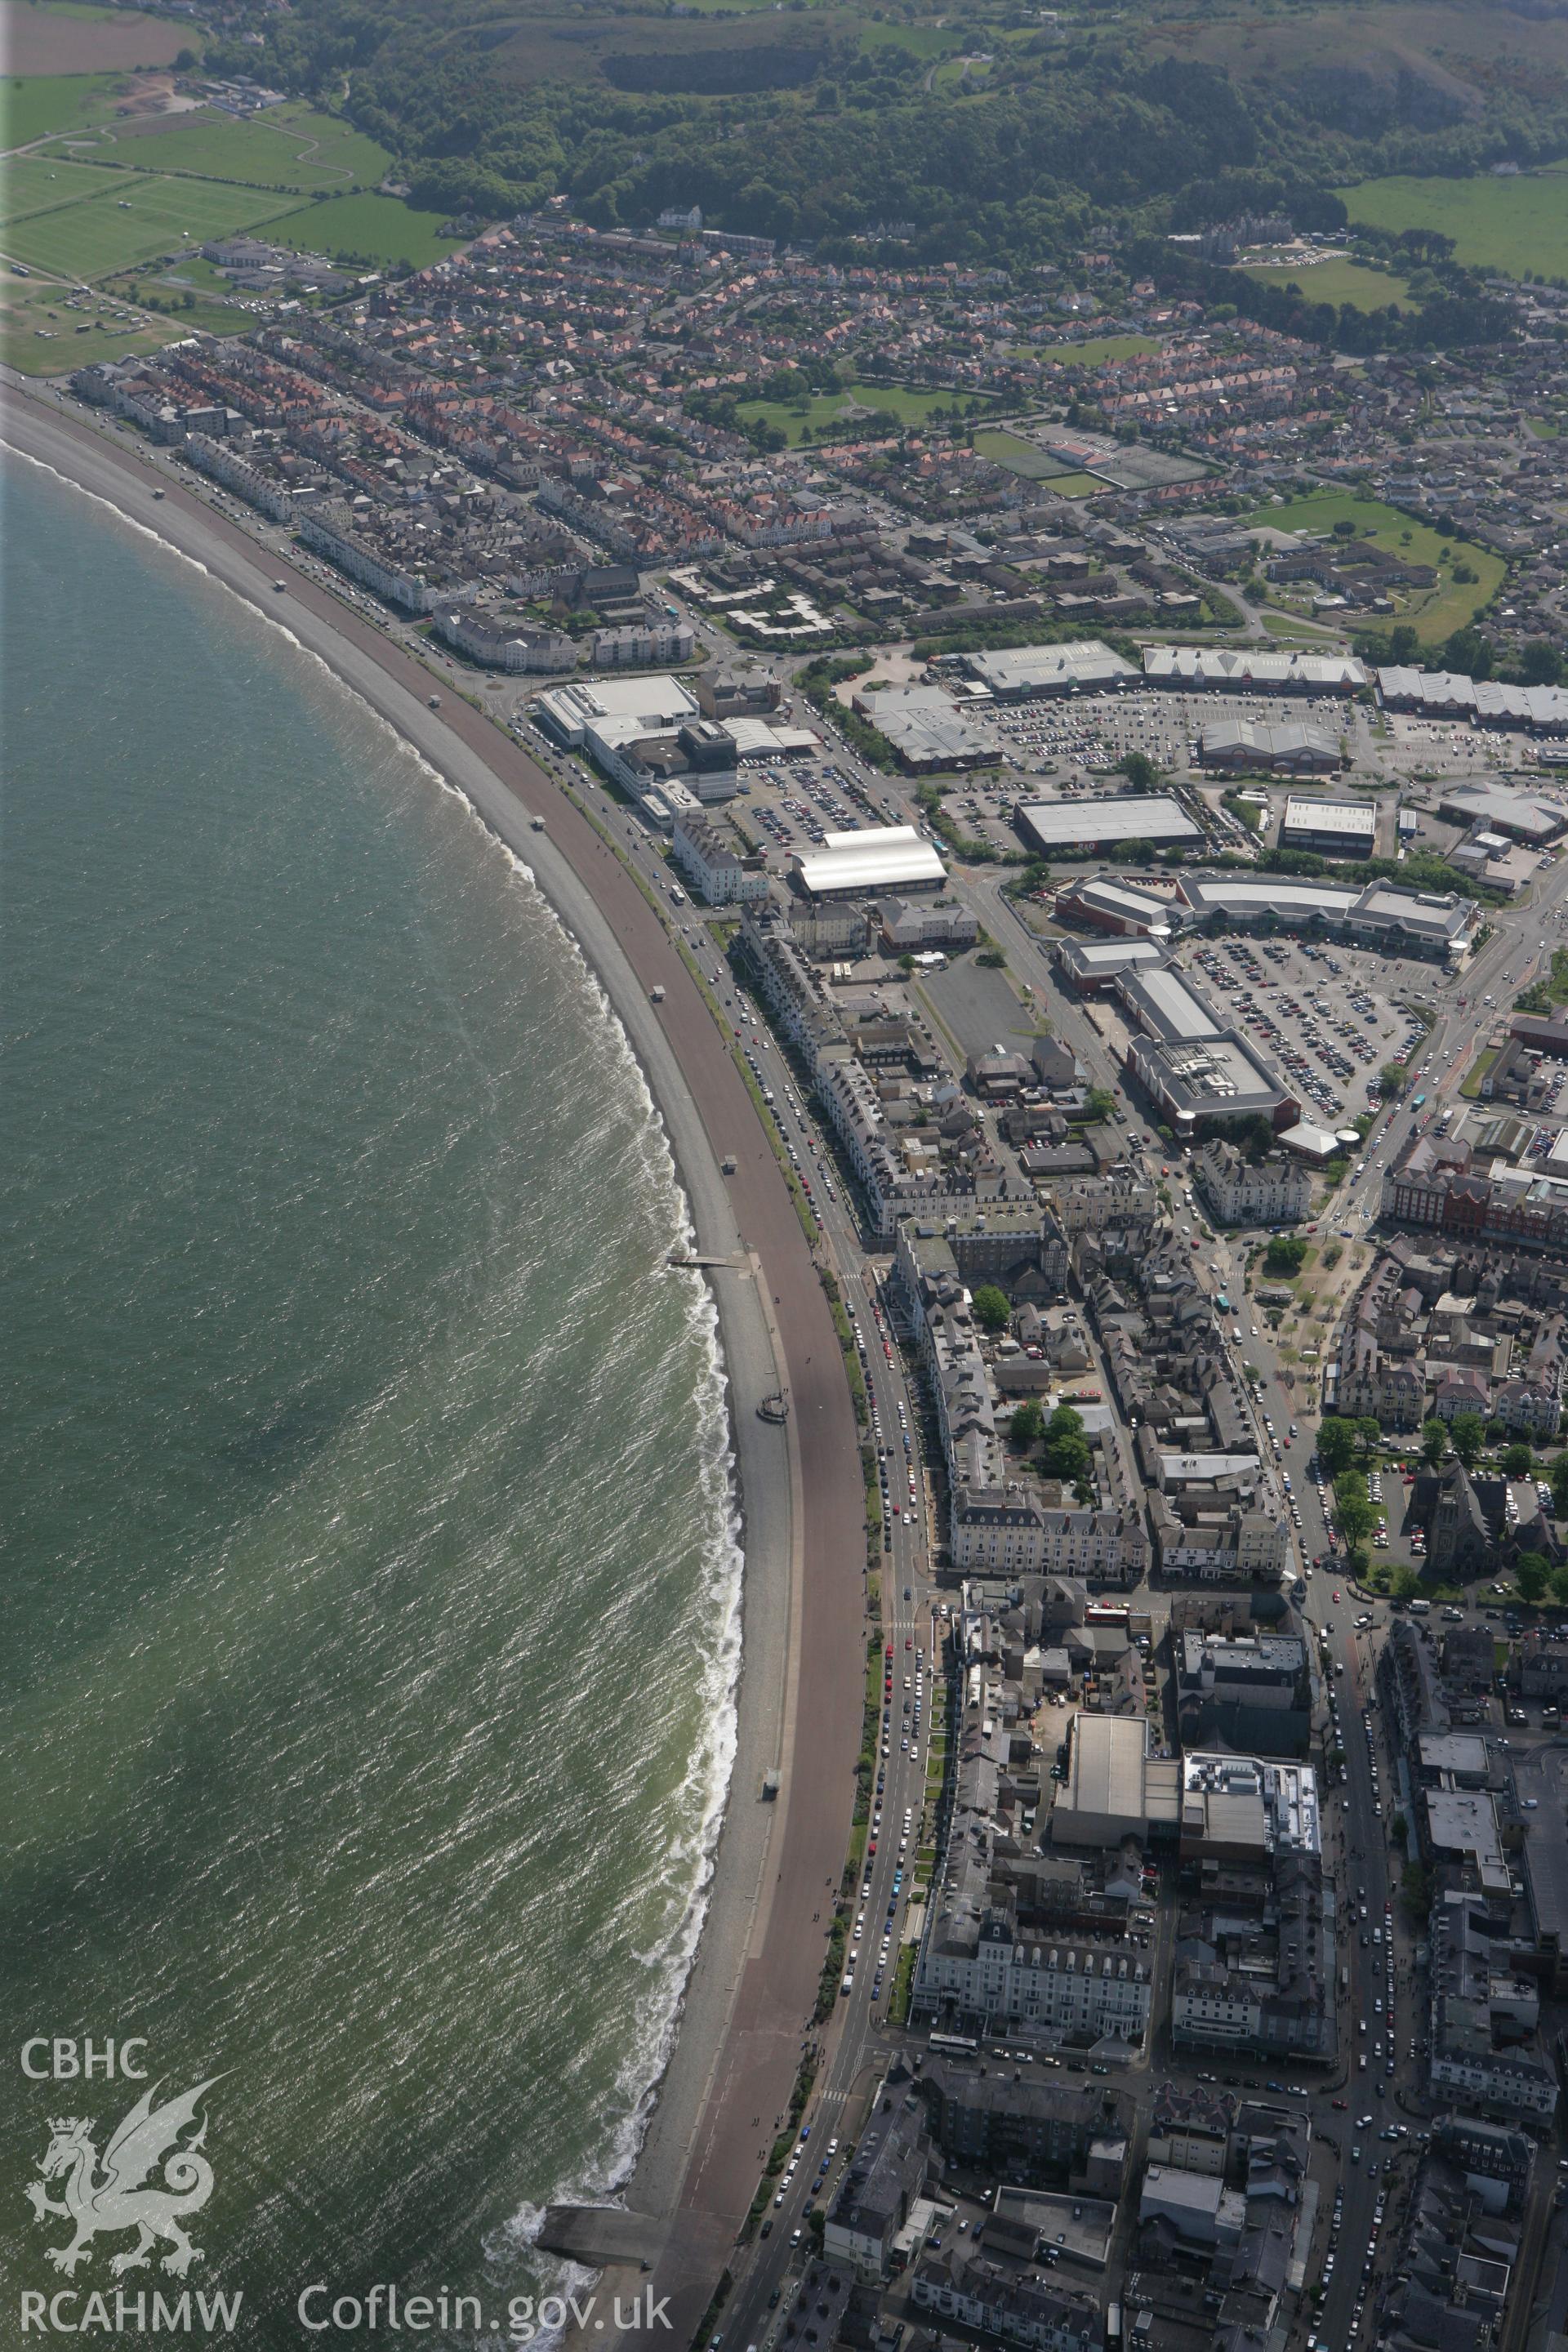 RCAHMW colour oblique photograph of Llandudno. Taken by Toby Driver on 03/05/2011.